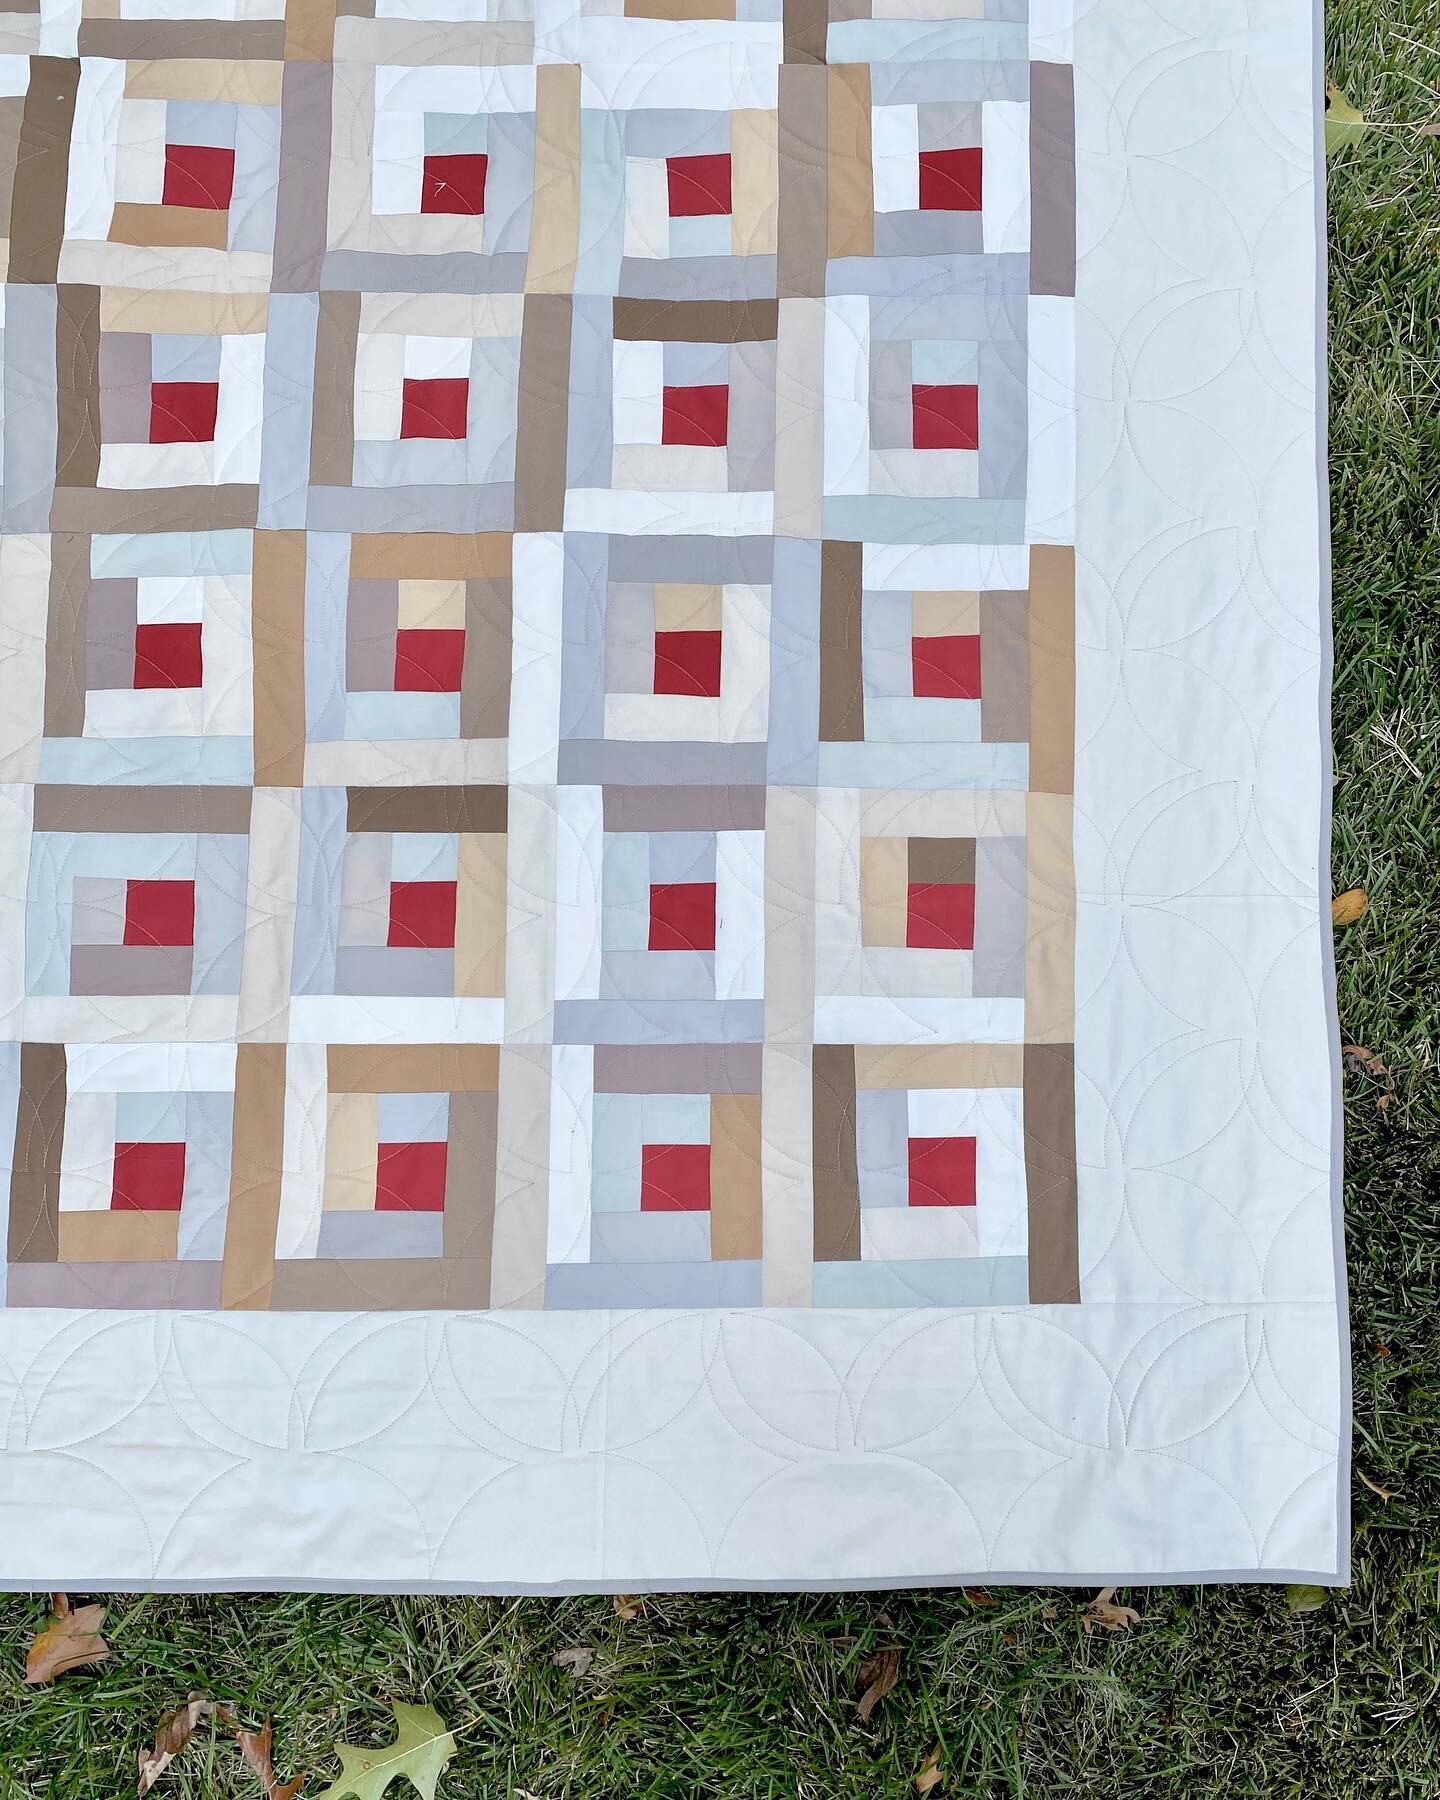 And now a little something for the neutral folks 😉 
.
.
This quilt was also made for a log cabin (do I have a type or what? Ha!)
#customquilt #logcabinquilt #logcabin #modernquilt #goodquilt #modernlogcabin #modernlogcabinquilt